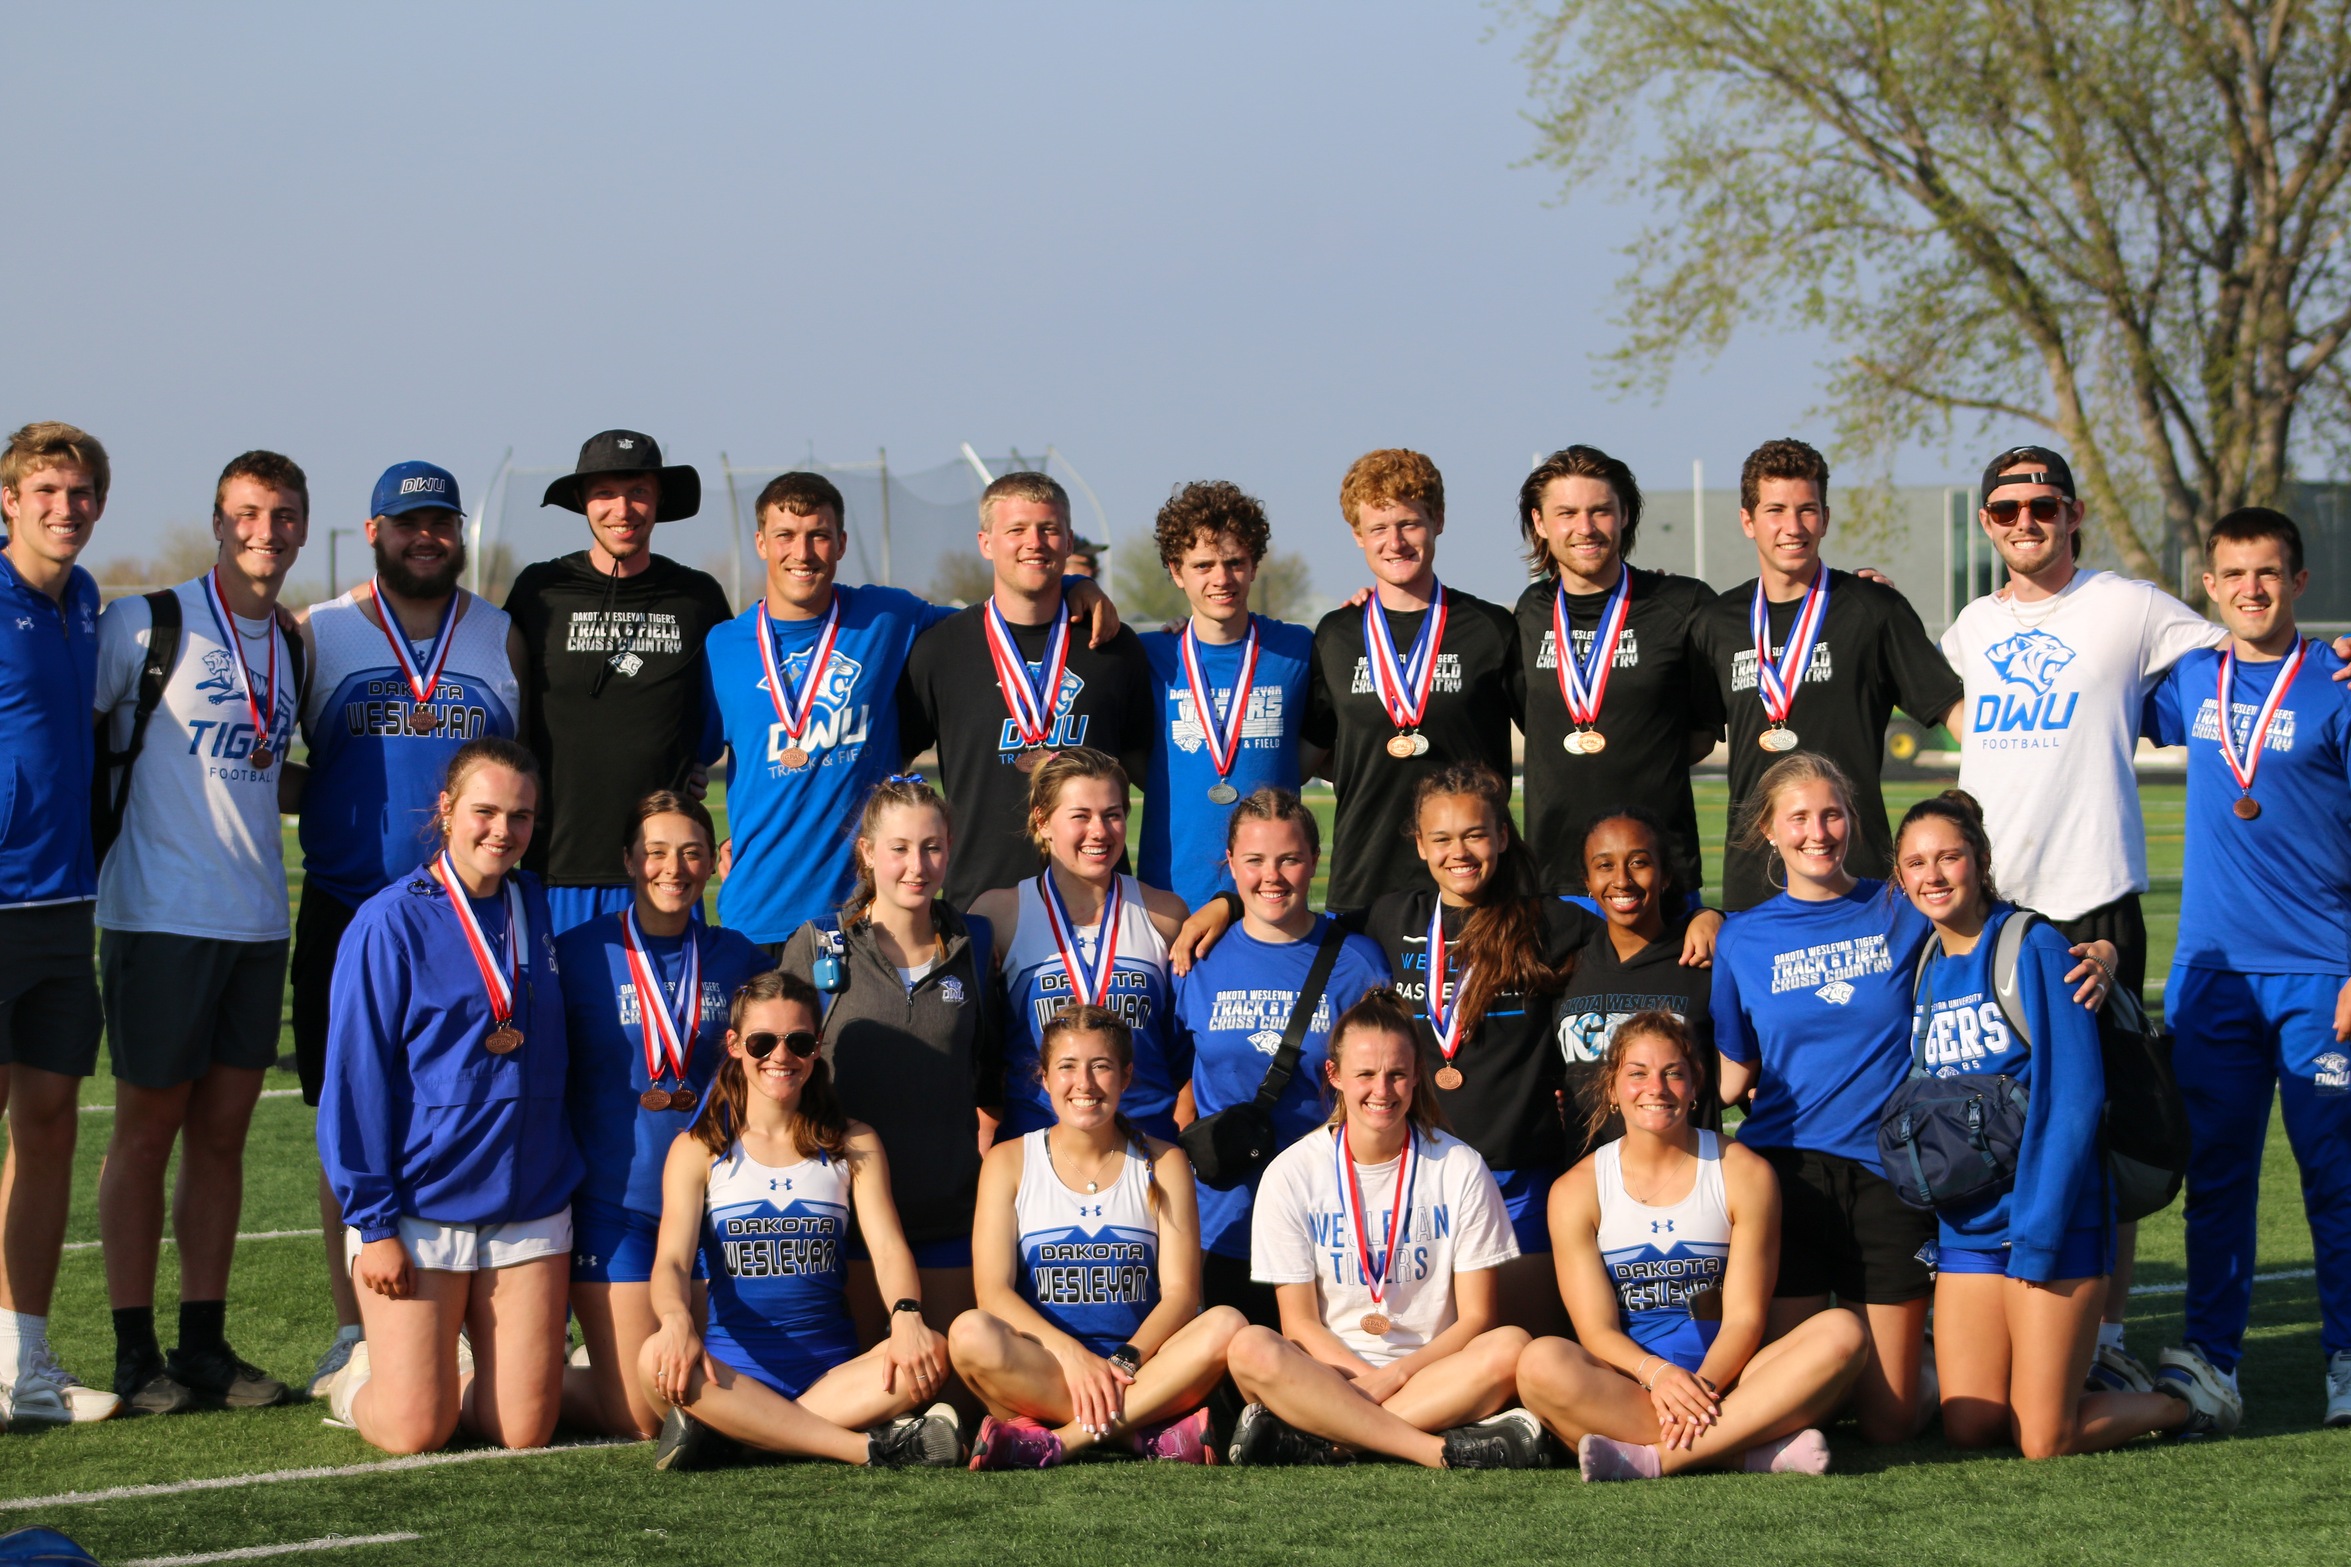 DWU TIGER TRACK & FIELD HAS HISTORIC DAY AT GPAC CHAMPIONSHIPS, HIGHLIGHTED BY MAGNUSON AND RUPPRECHT NATIONAL STANDARD PERFORMANCES